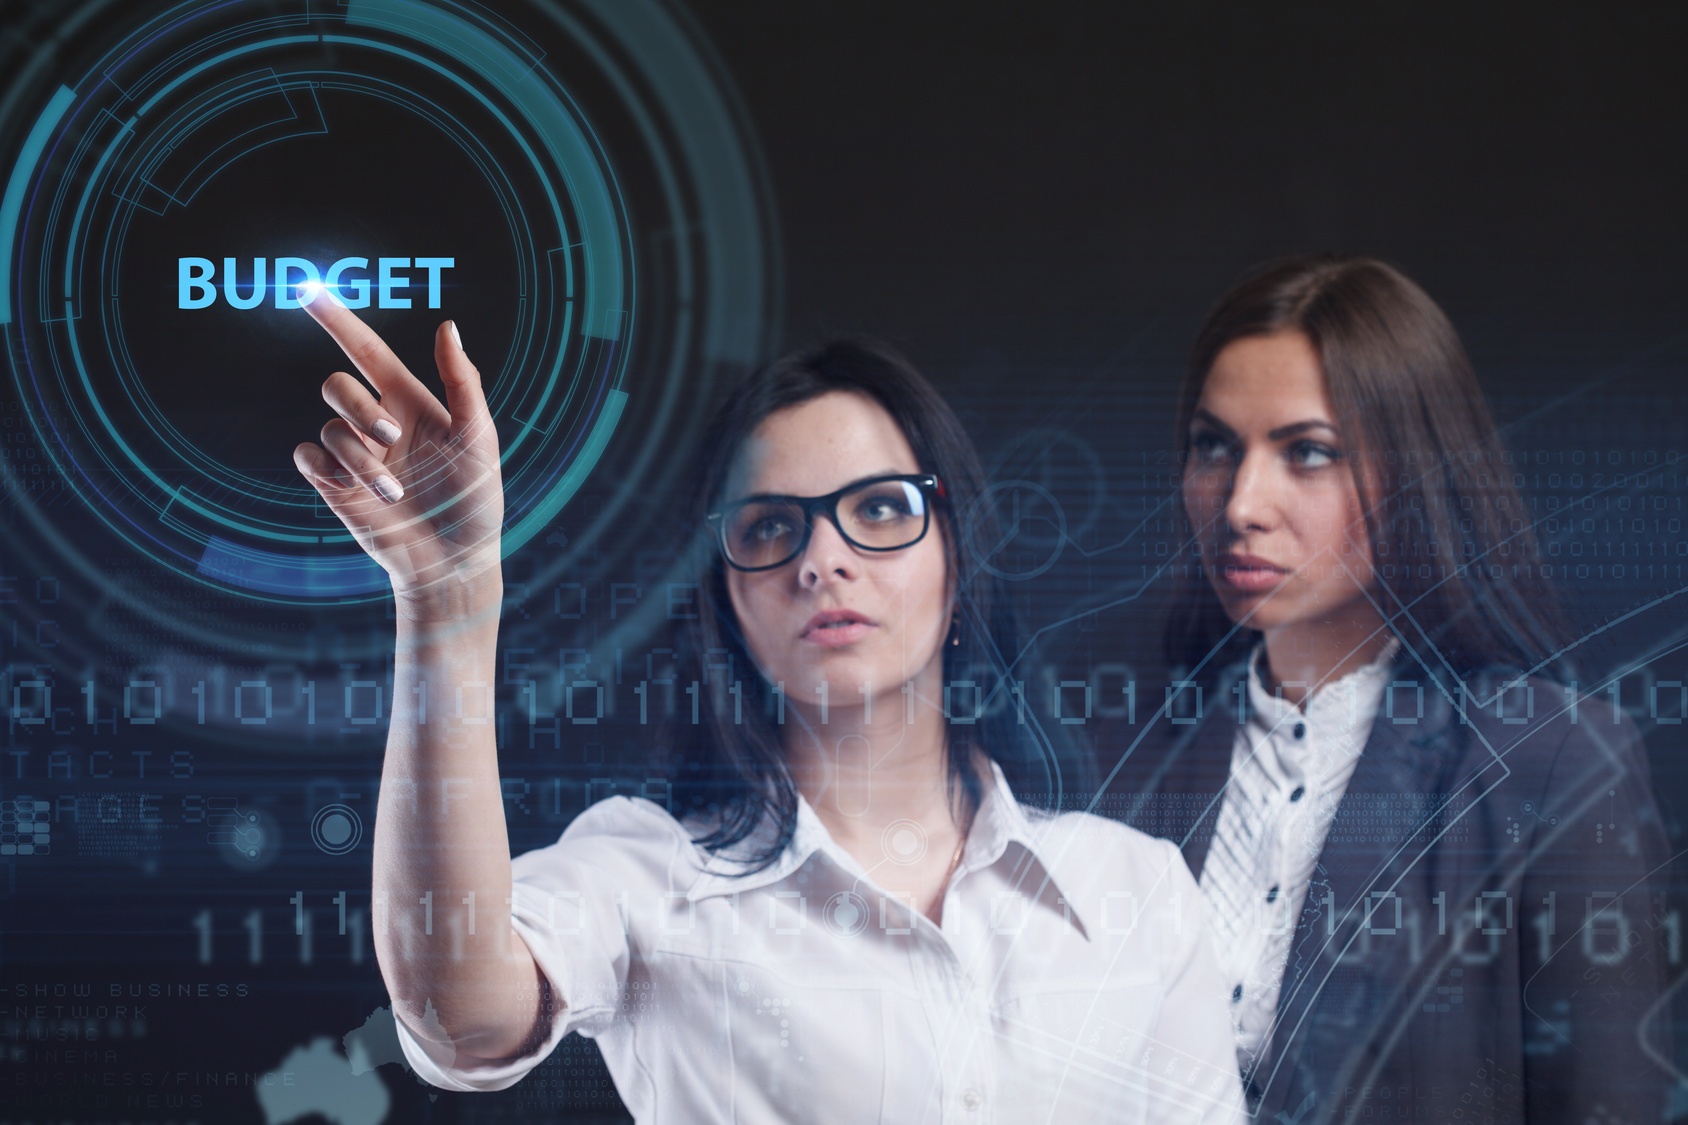 Use This Year’s Marketing Budget to Jumpstart Next Year’s Success